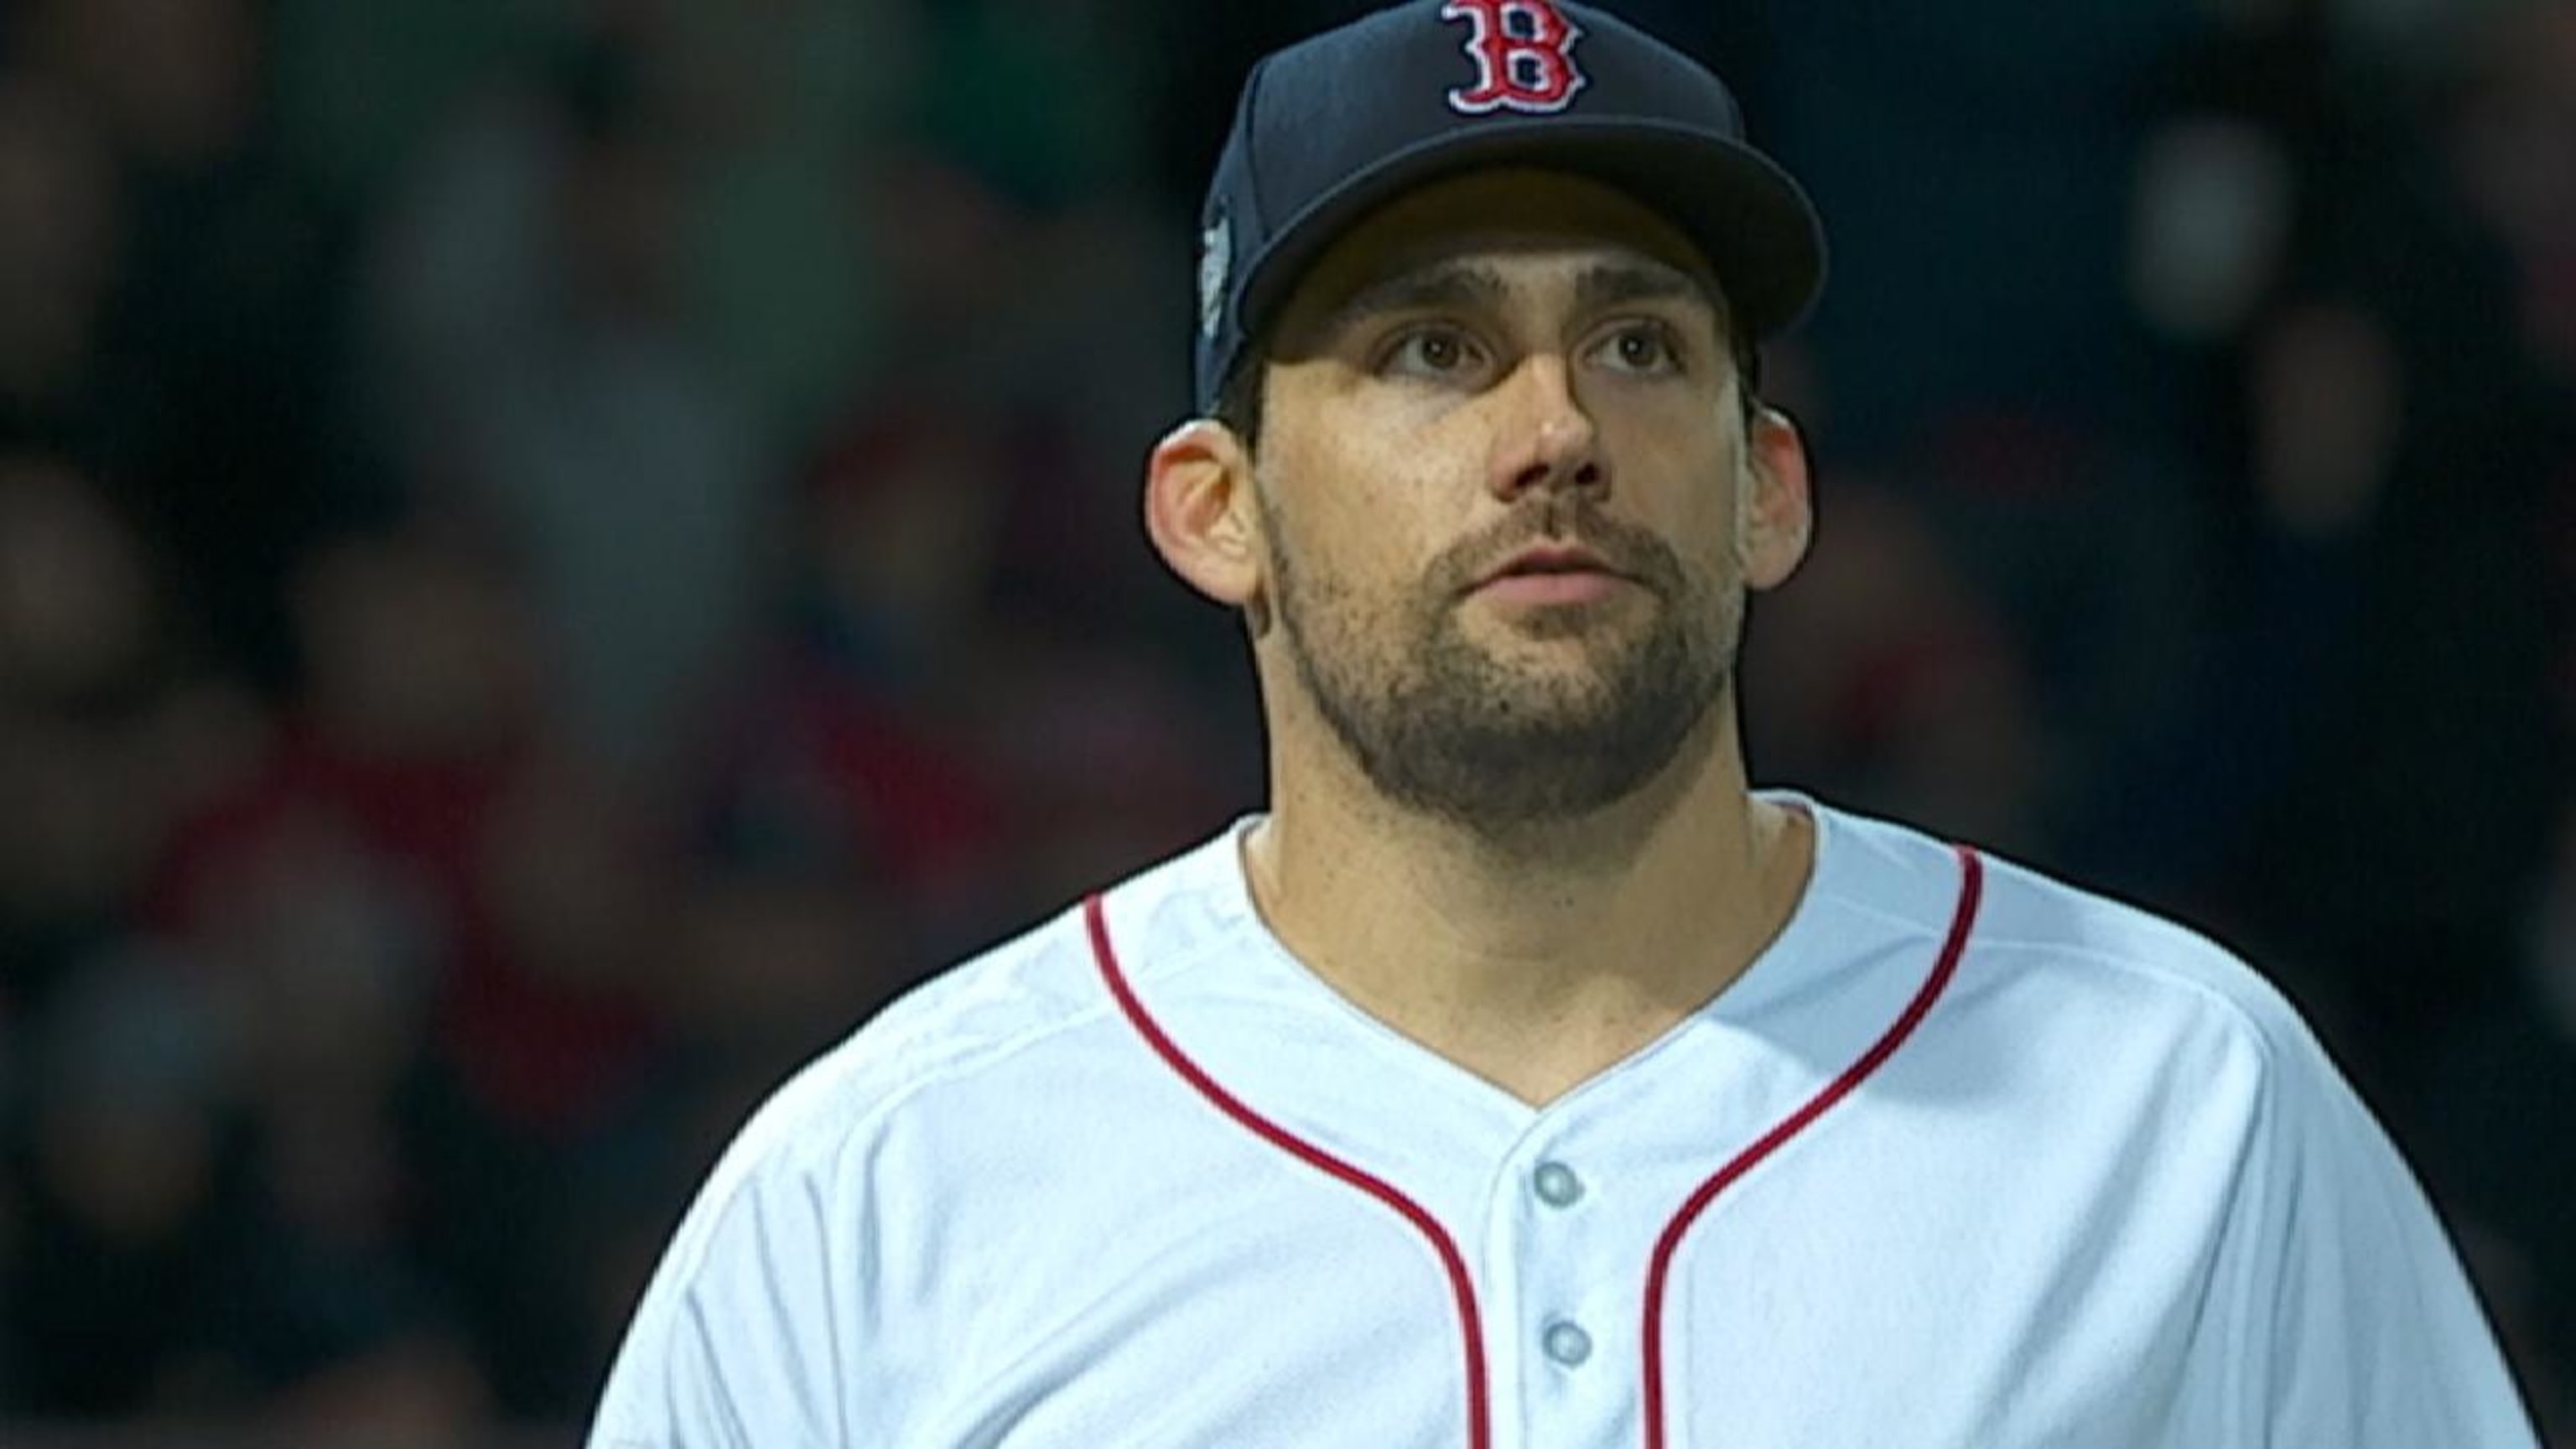 Nathan Eovaldi agrees to deal with Red Sox